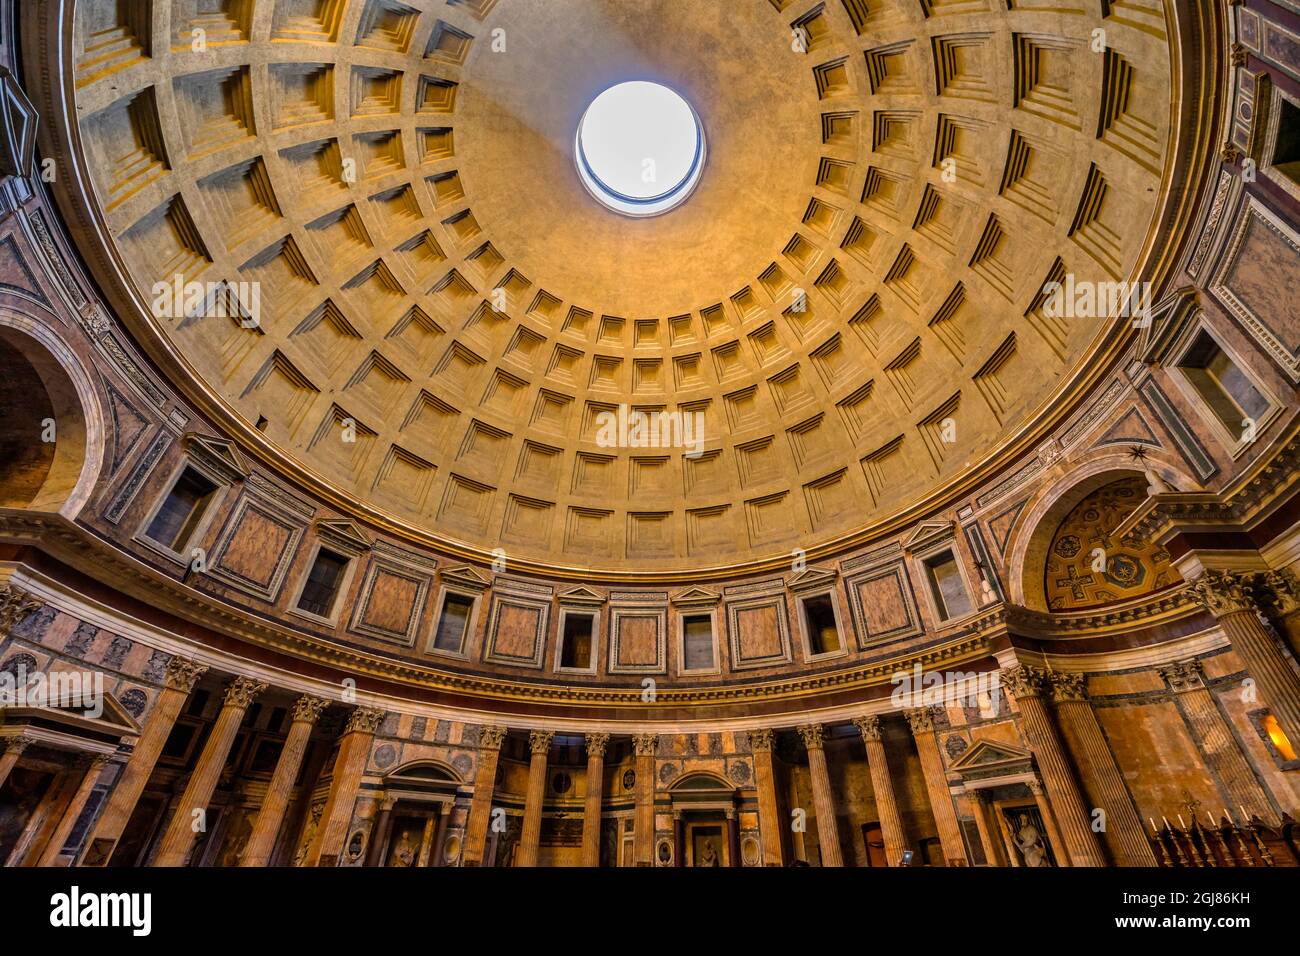 Wide Dome Pillars Altar Wide Pantheon, Rome, Italy. Rebuilt by Hadrian in 118 to 125 AD the Second Century Became oldest Roman church in 609 AD. Oculu Stock Photo